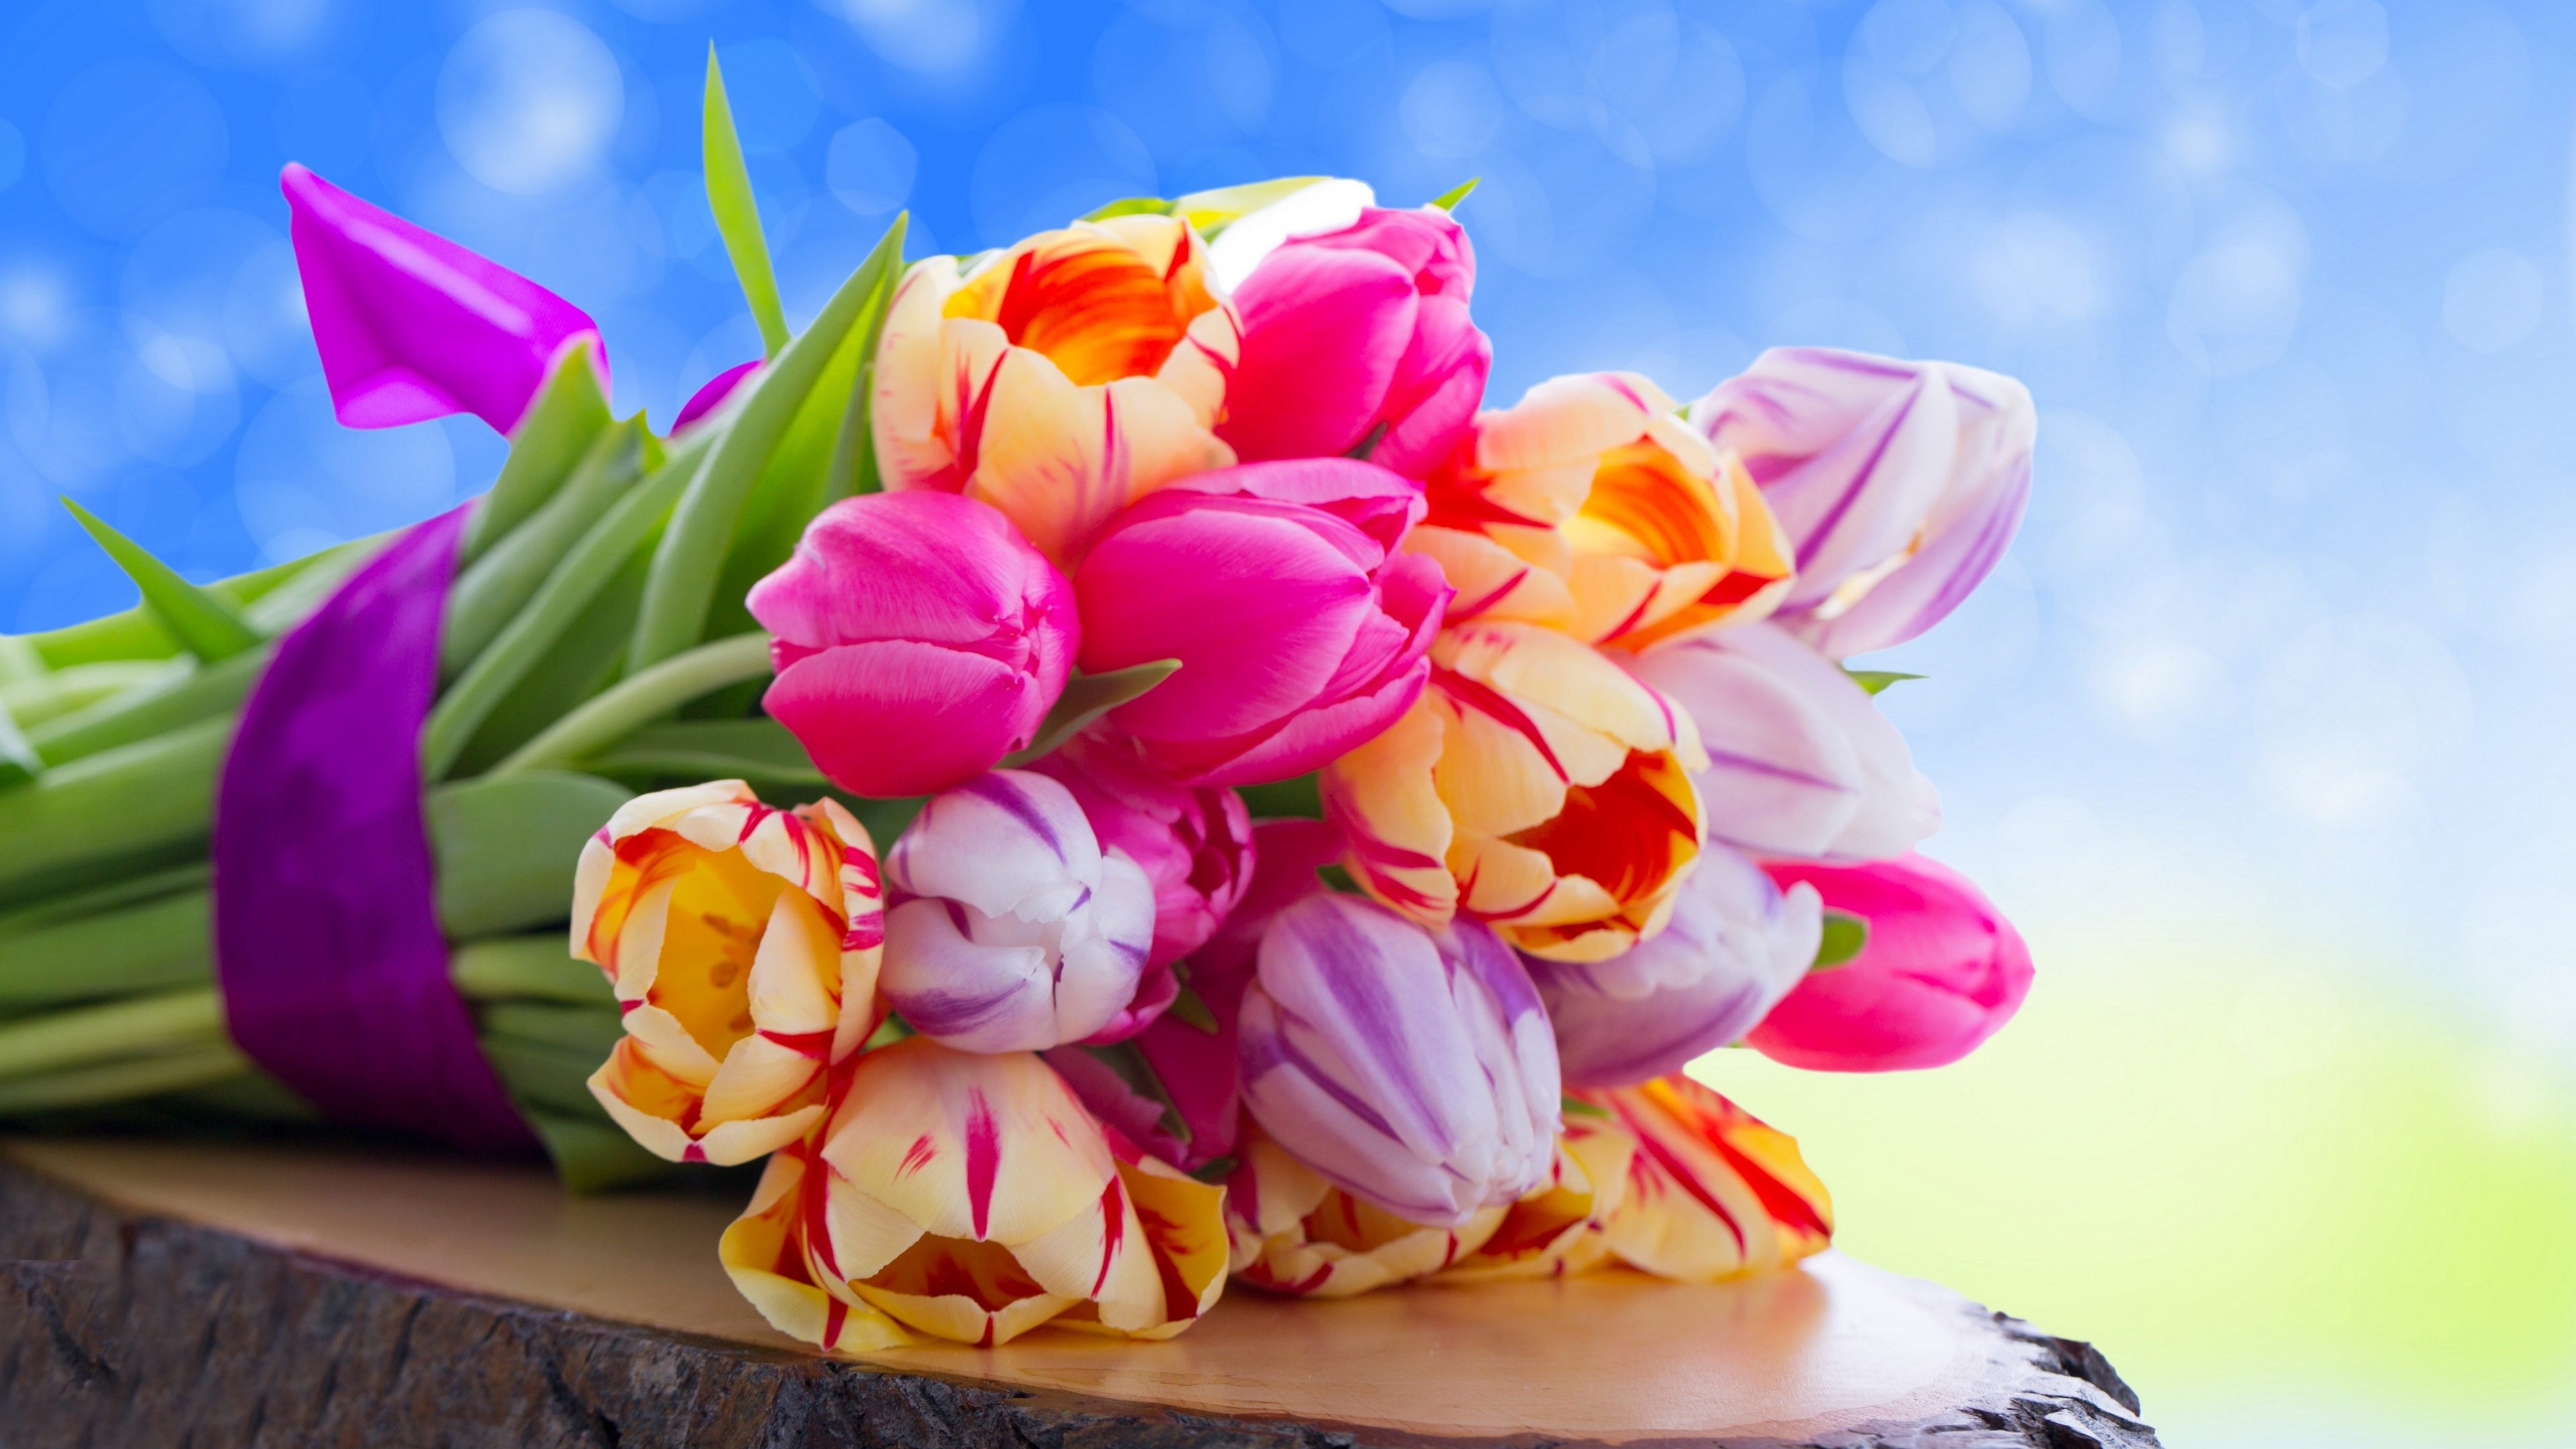 Pink and Yellow Tulips Bouquet. Wallpaper in 3840x2160 Resolution